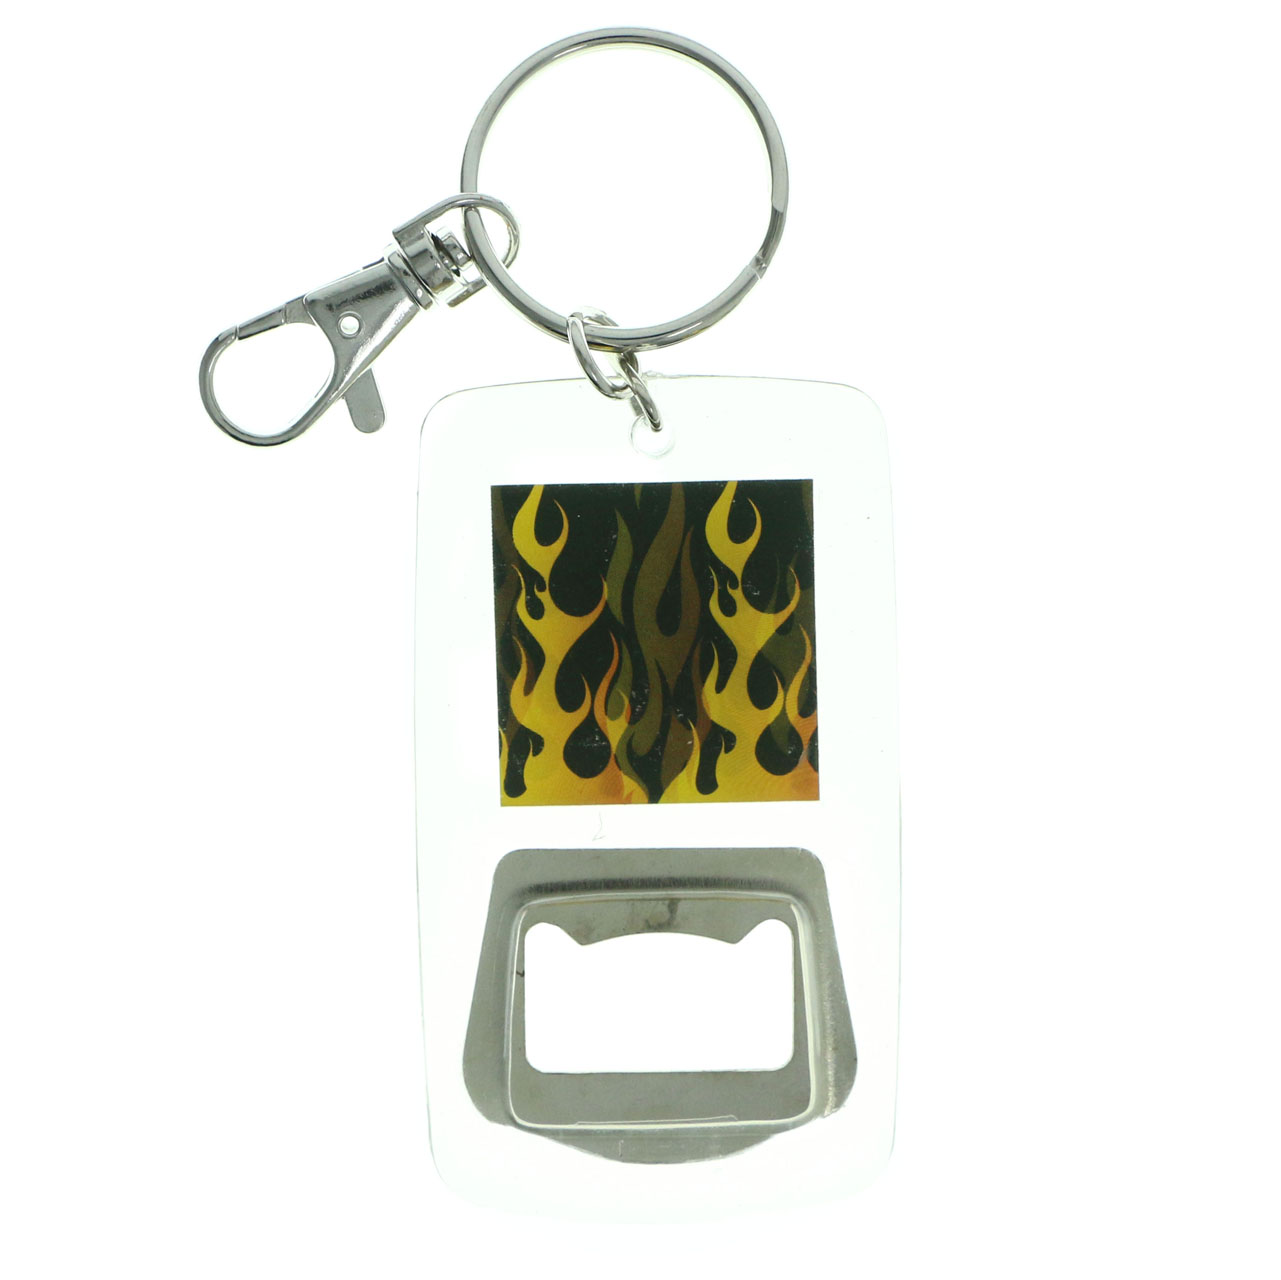 MI AMORE Bottle Opener With Flame Design Split Ring Key Chain